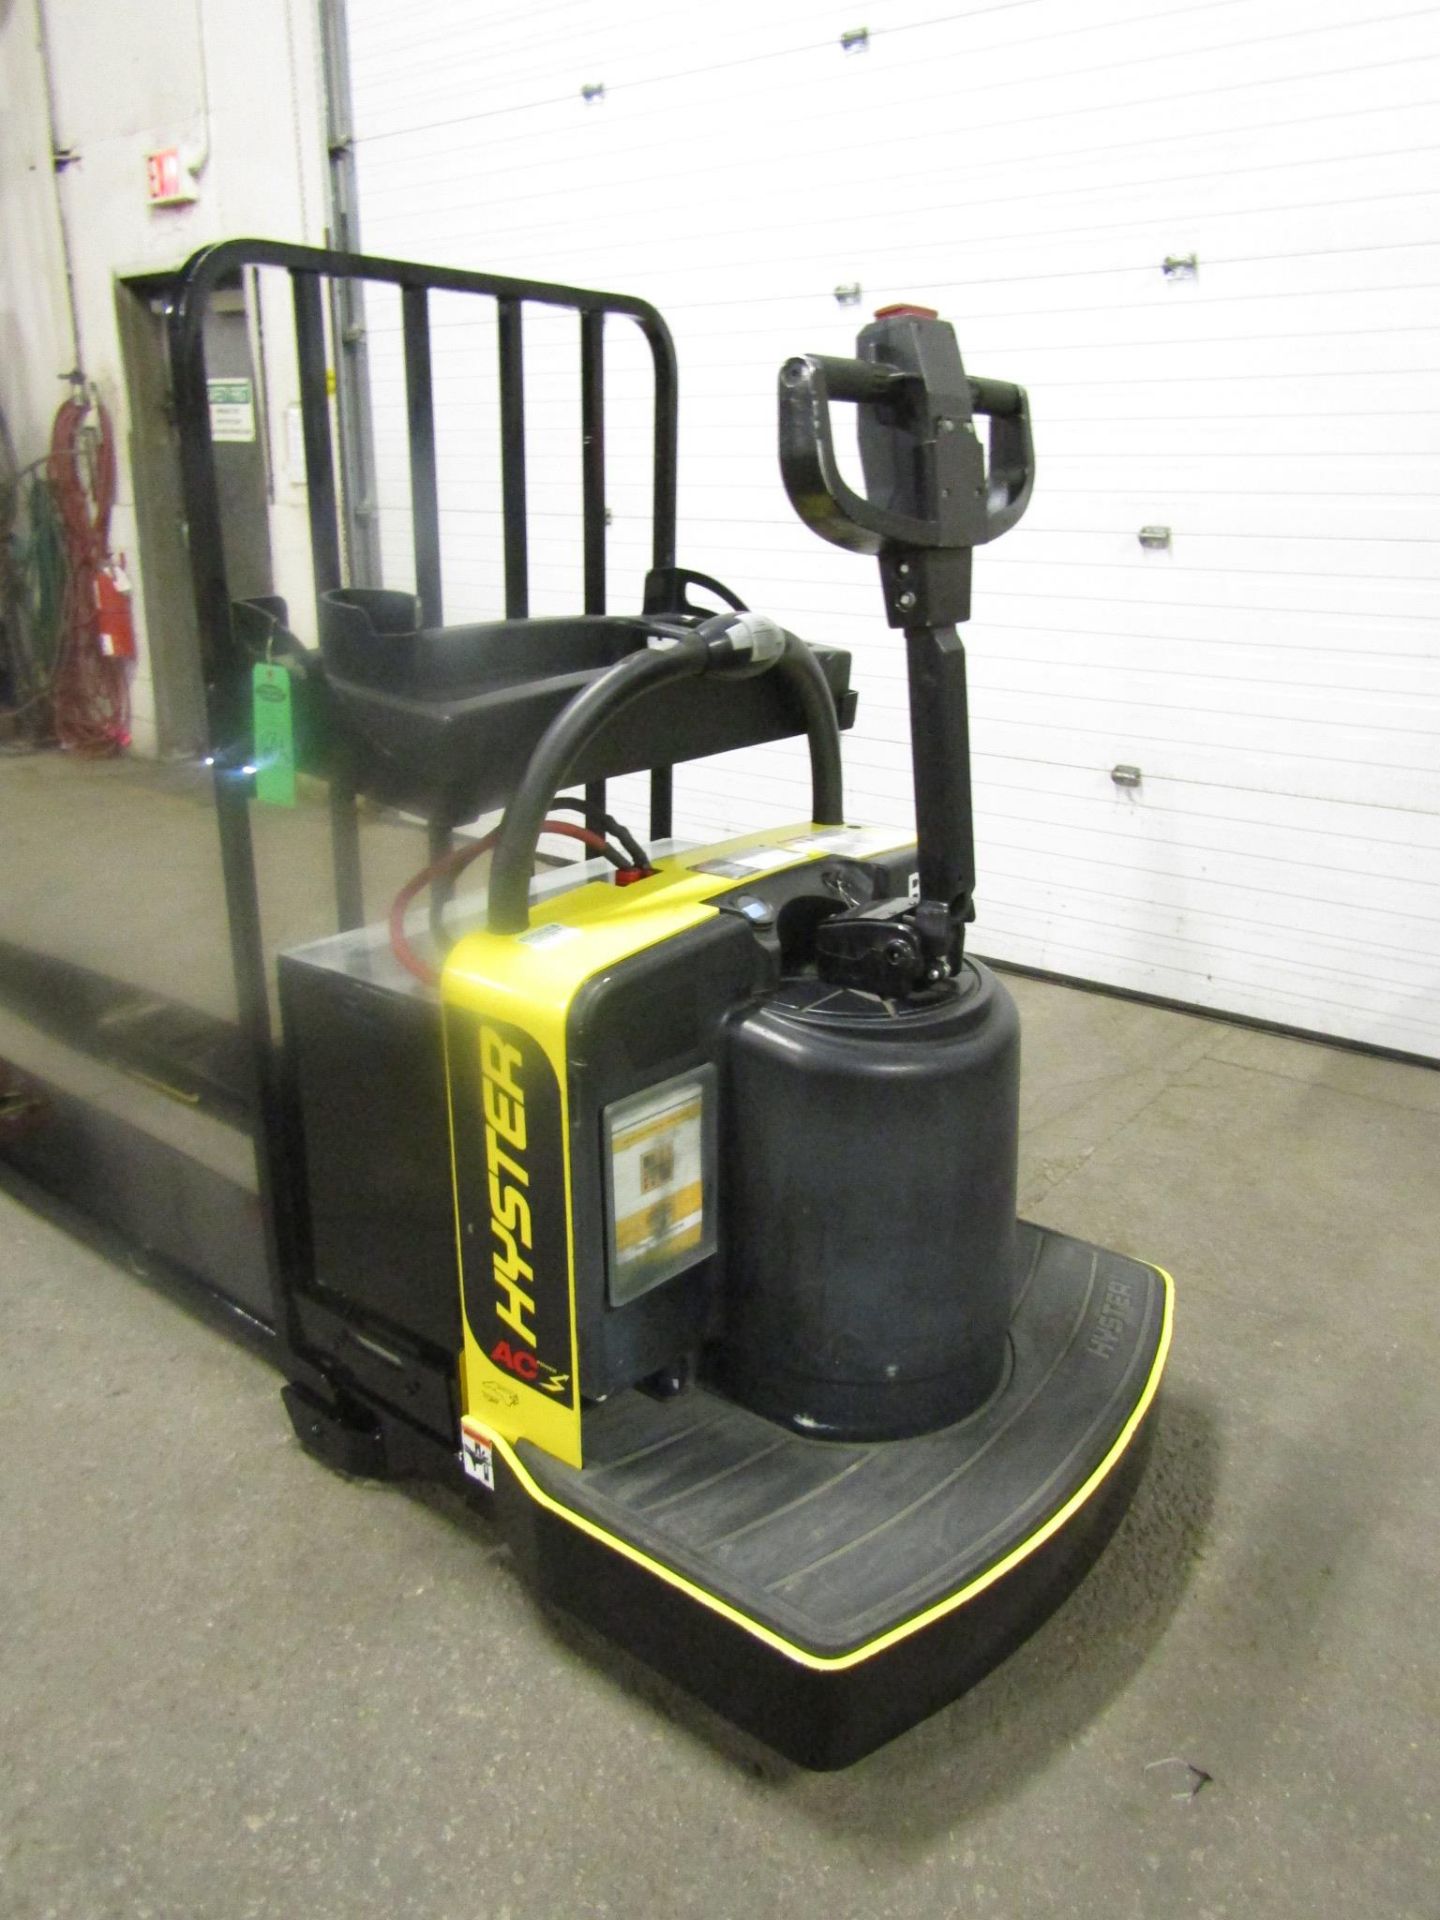 2013 Hyster Ride On Powered Pallet Cart with 8' LONG FORKS - Image 2 of 2